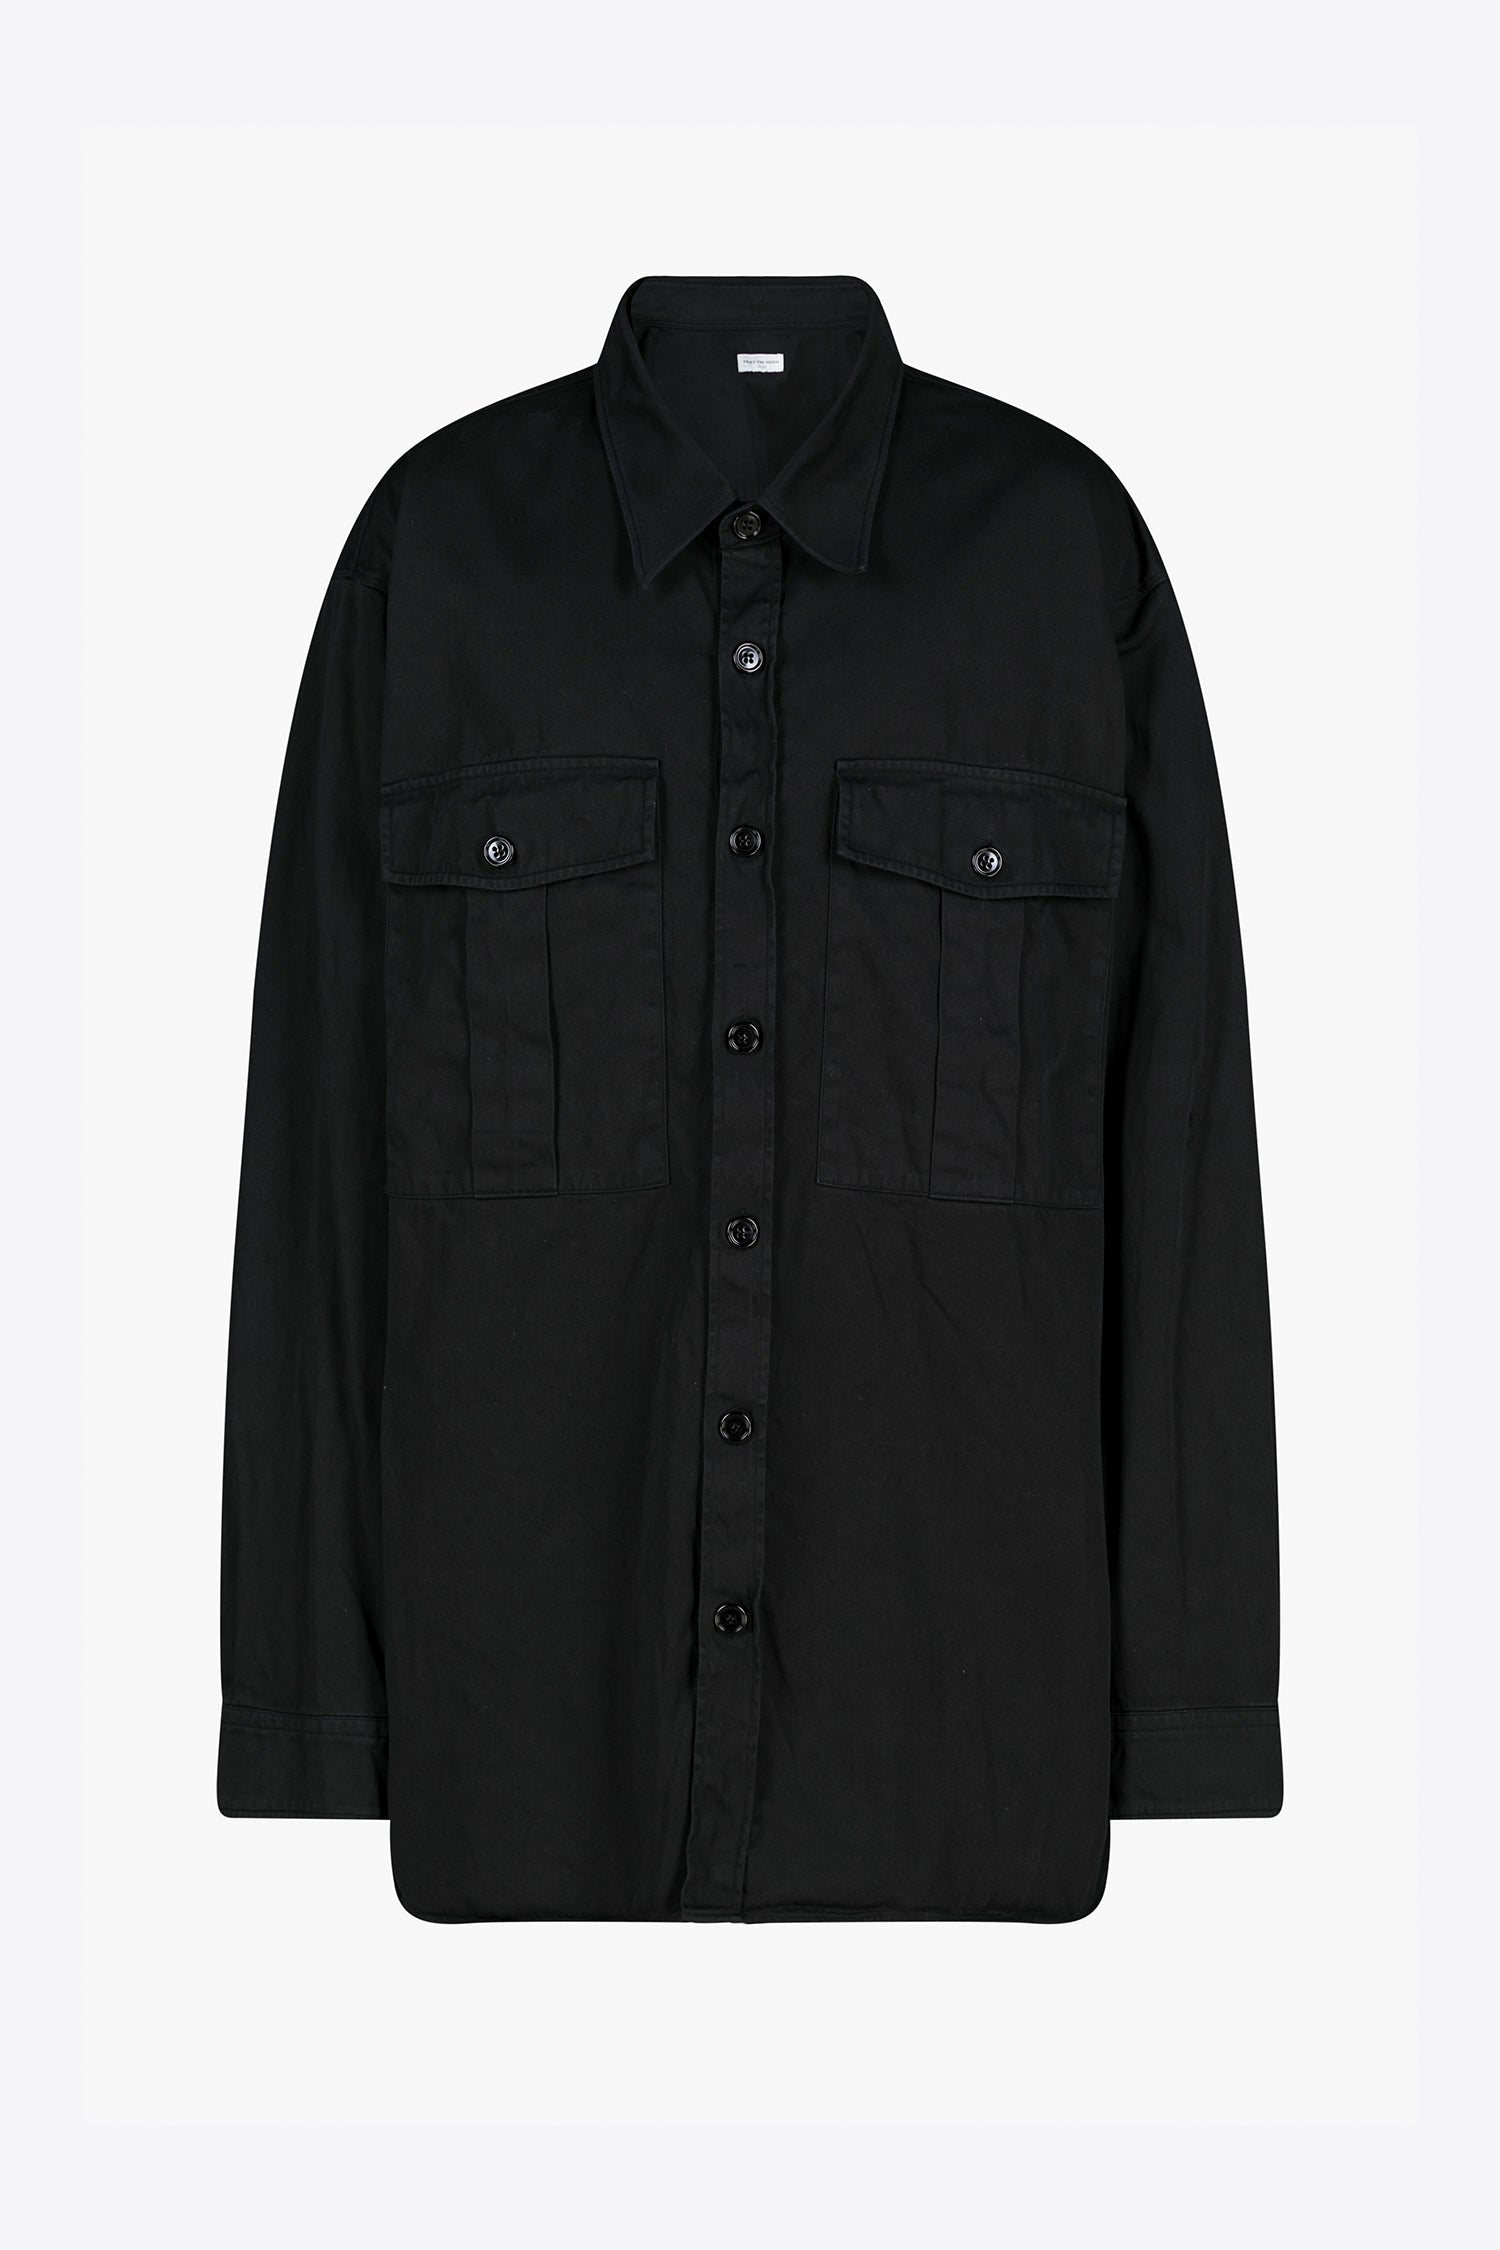 CROWSEY SHIRT IN BLACK, AW23